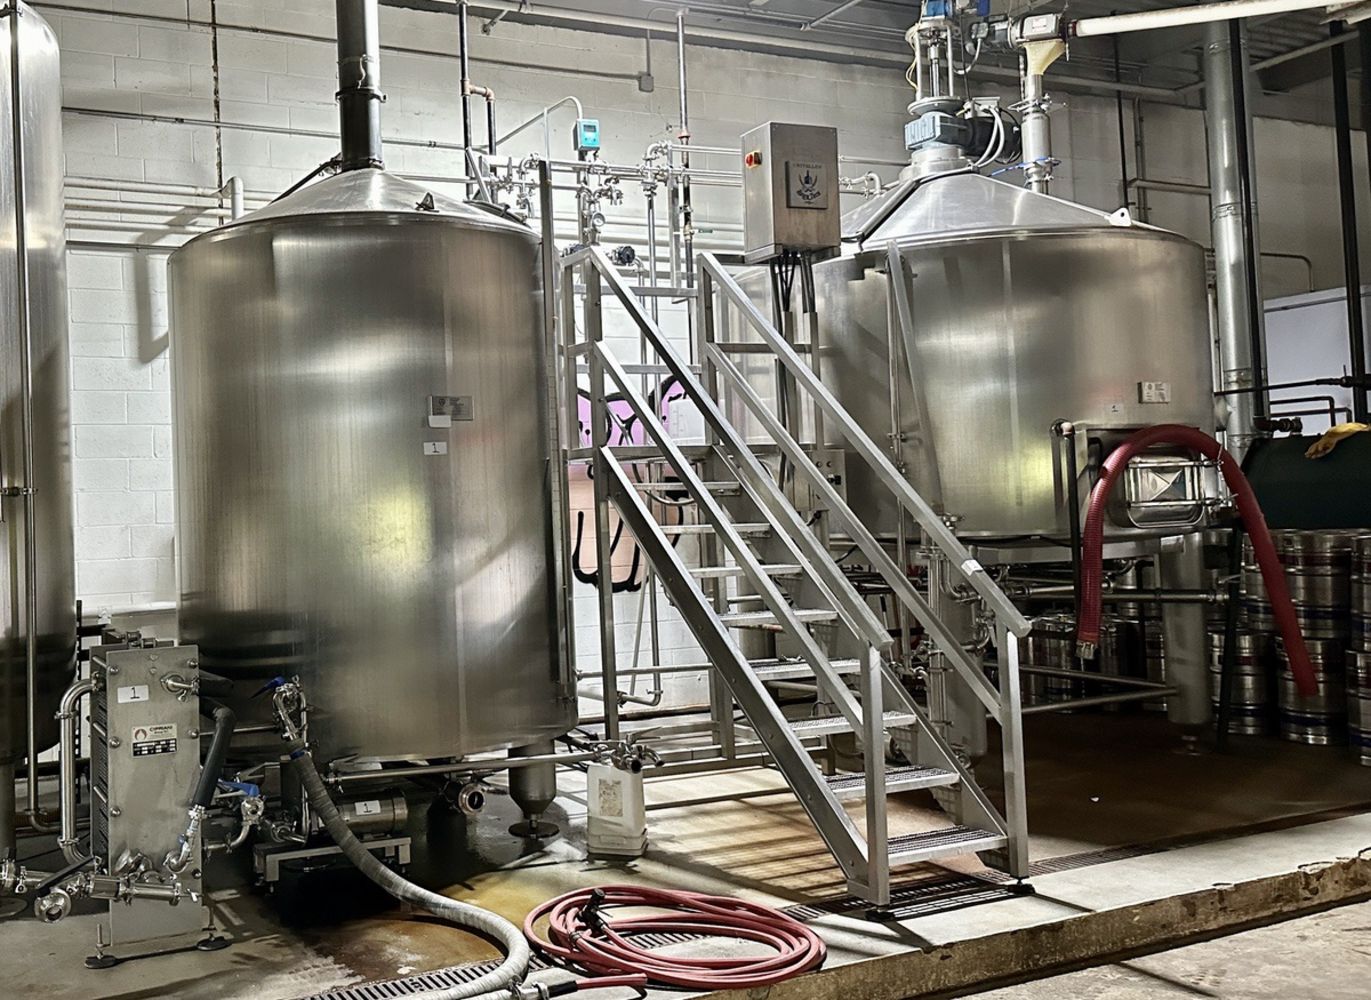 30 BBL Microbrewery - Criveller 2-Vessel Brewhouse with CLT, Cask Canning Line, 60 BBL Fermenters and Brites, CIP, Grain Mill, Keg Washer, Kegs